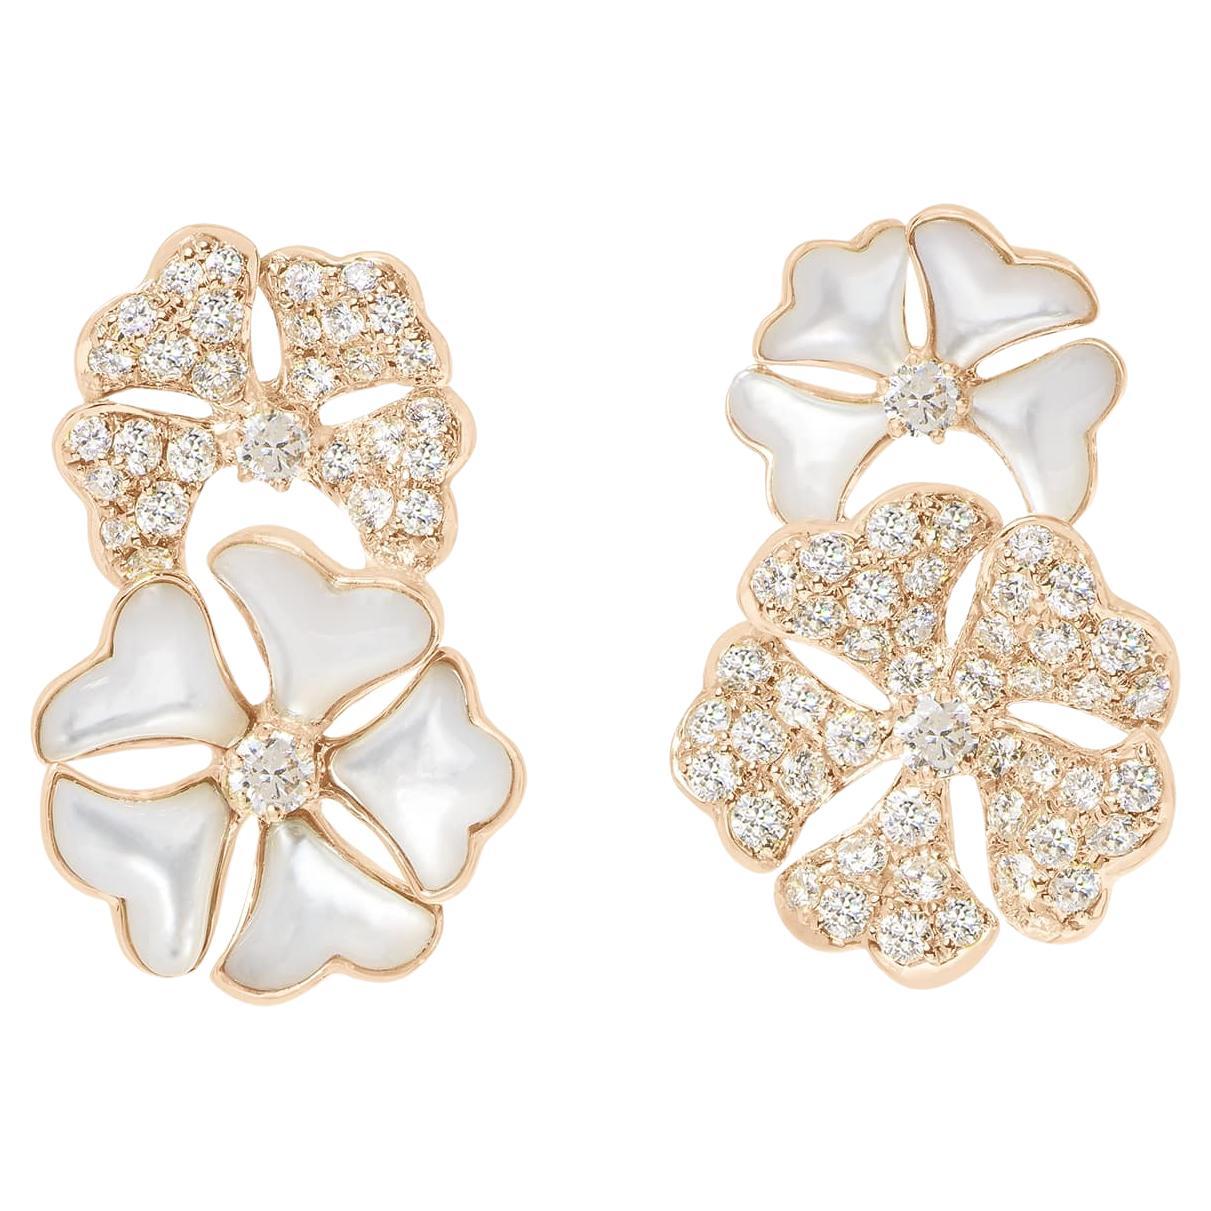 Bloom Diamond and White Mother of Pearl Double Bloom Earrings in 18k Rose Gold